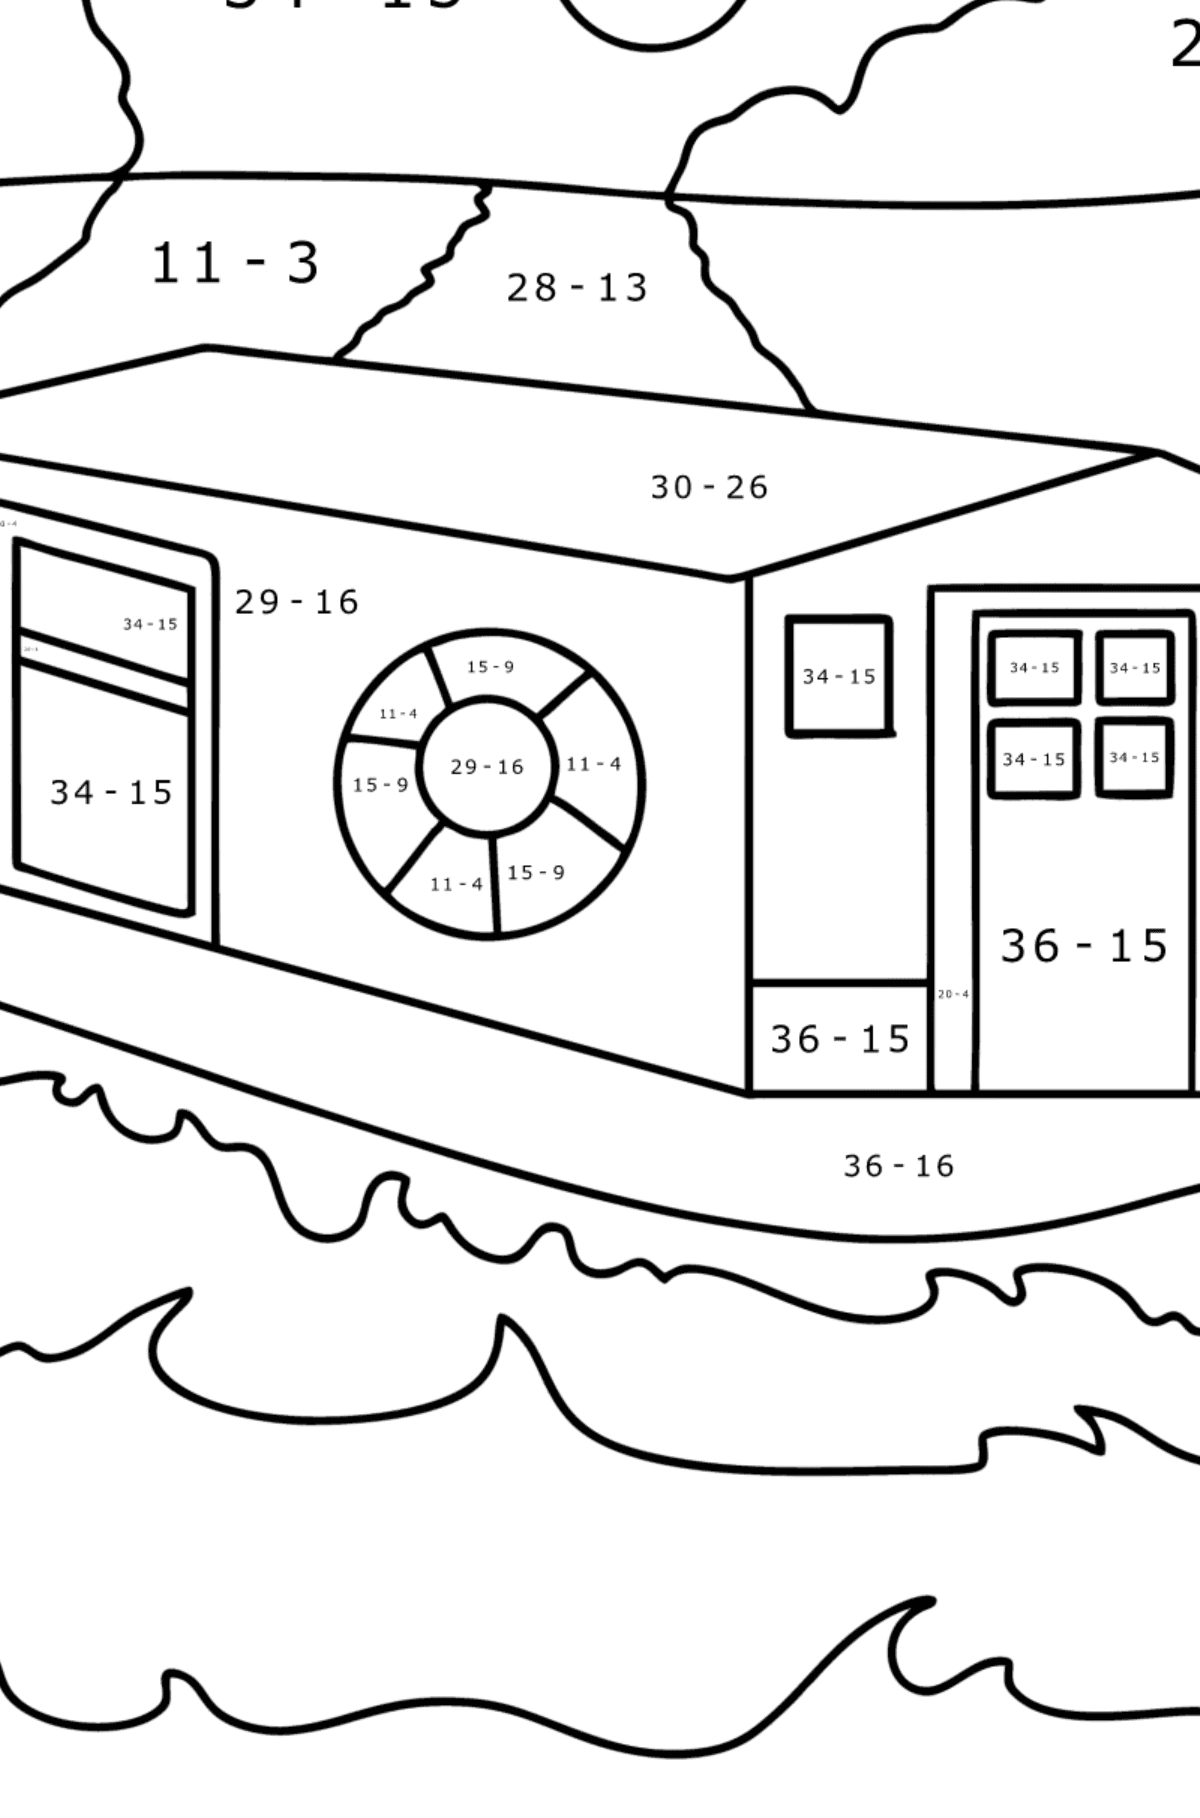 BoatHouse coloring page - Math Coloring - Subtraction for Kids